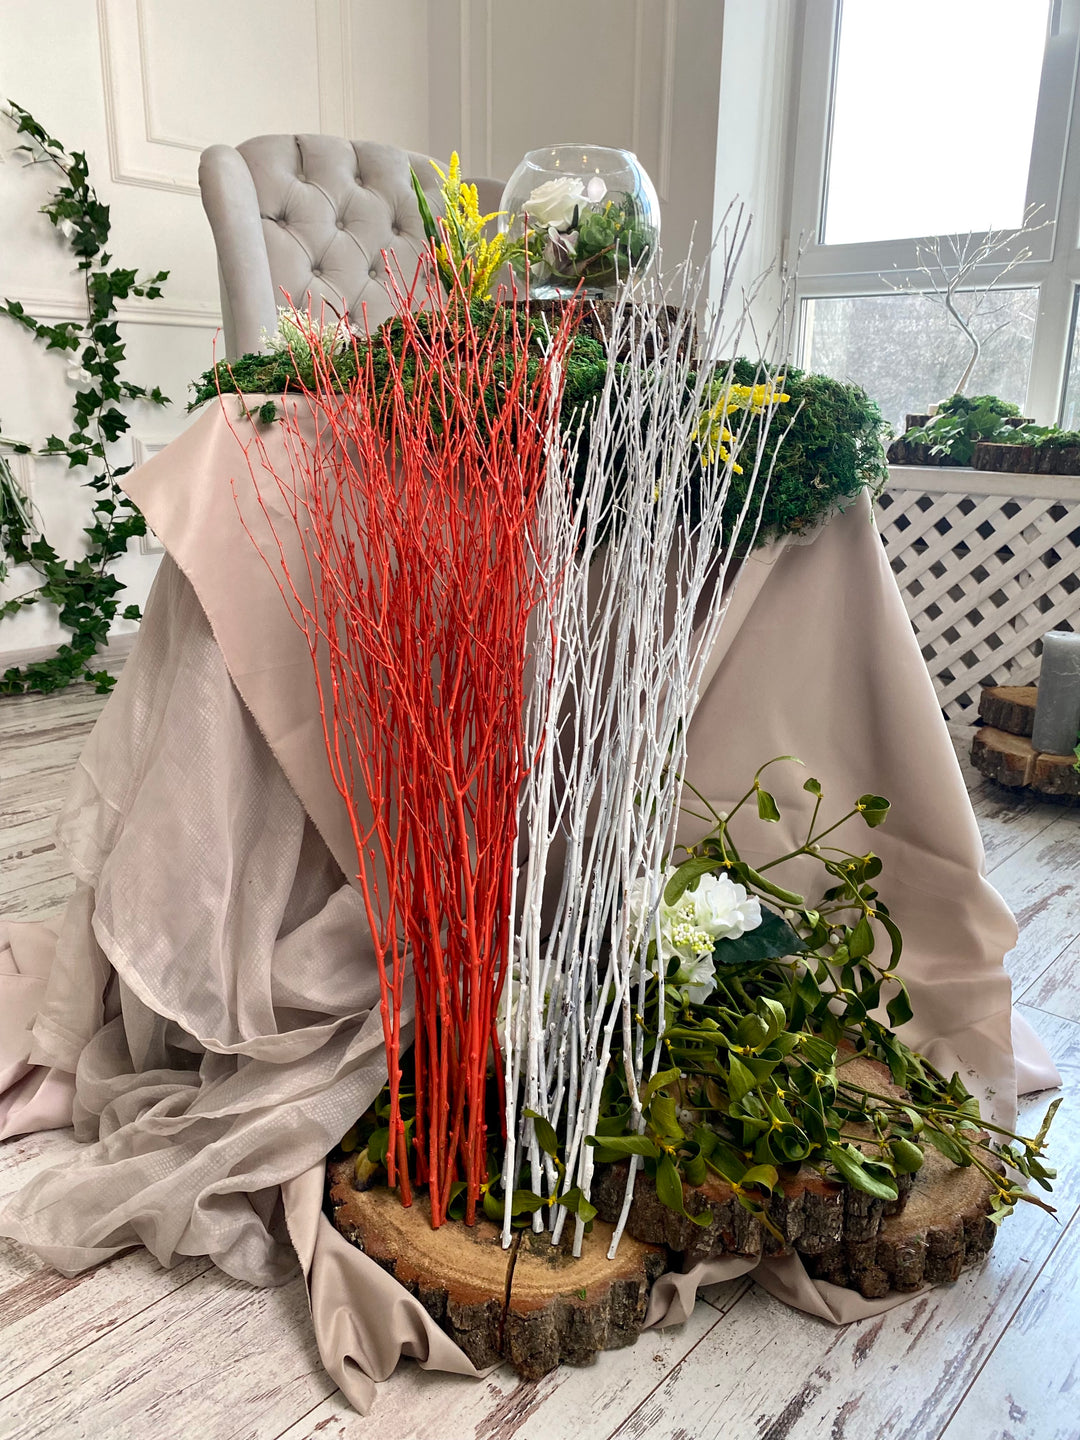 73 cm Ecovenik Orange - Red Birch Branches - Natural Birch Twigs, Pack of  20-25 Stems, 29 inches Long - Perfect for Floor Vases and Striking Colorful